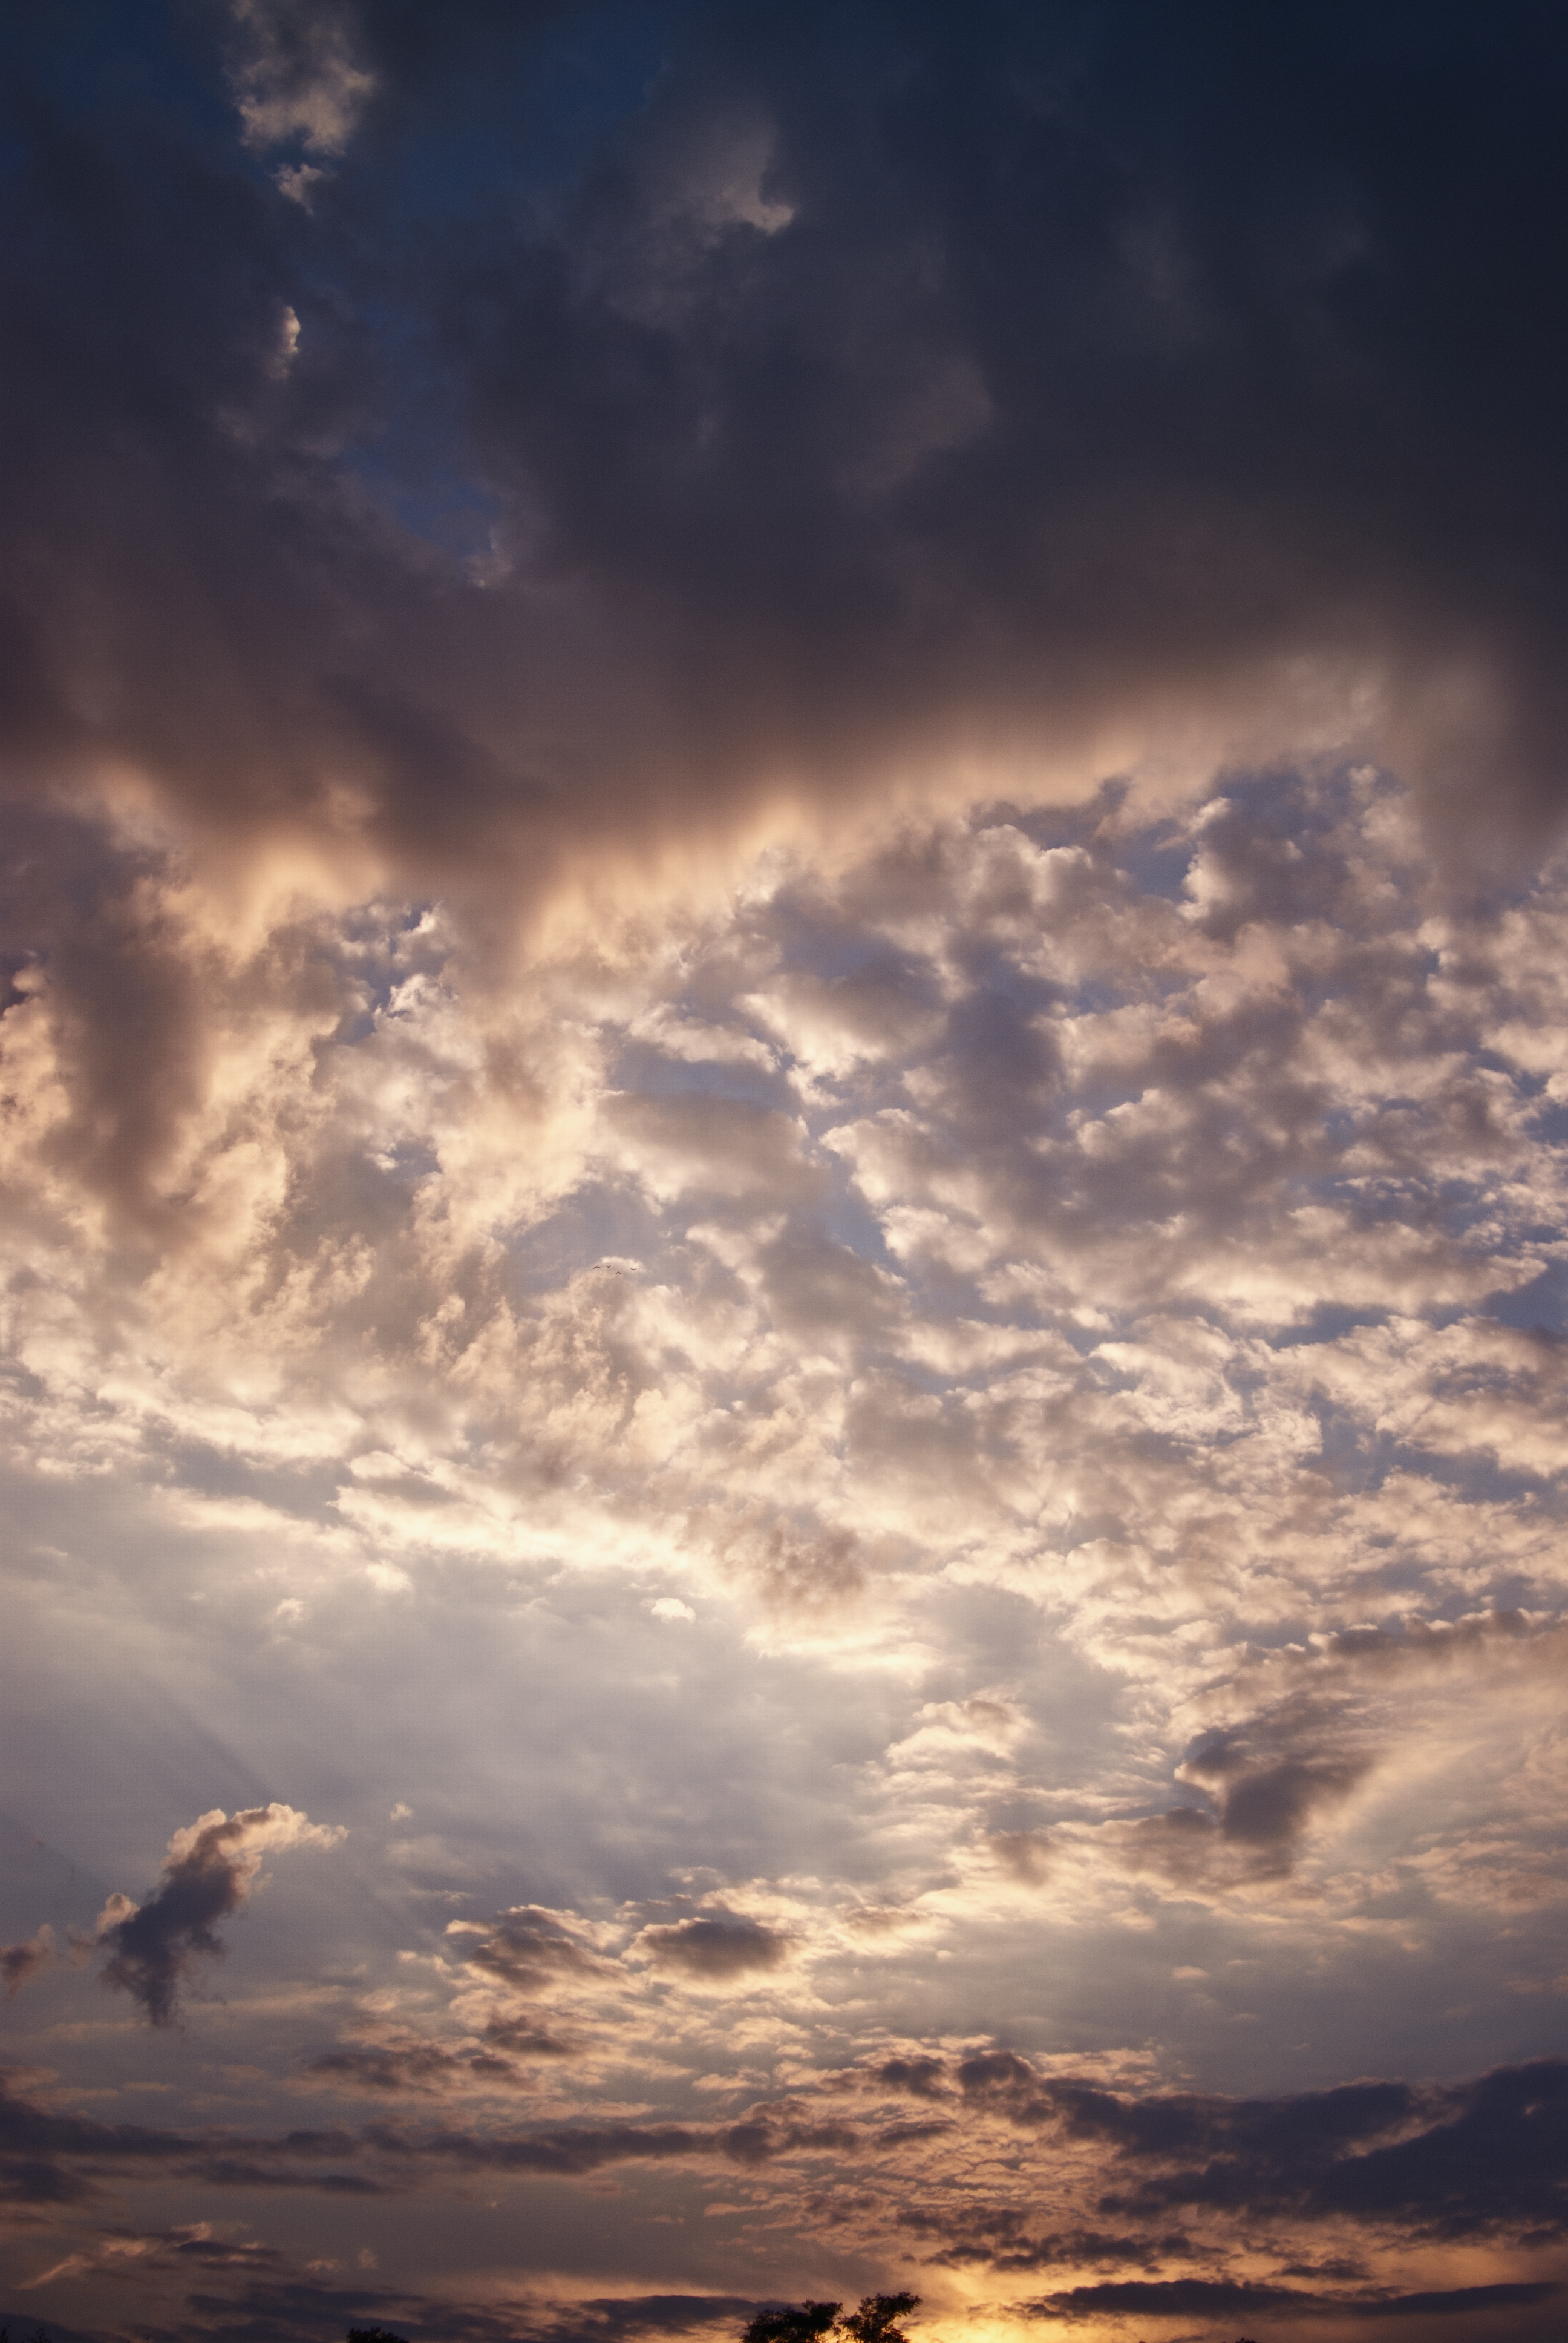 clouds, nature, sunset, sky, evening, cloudy phone background